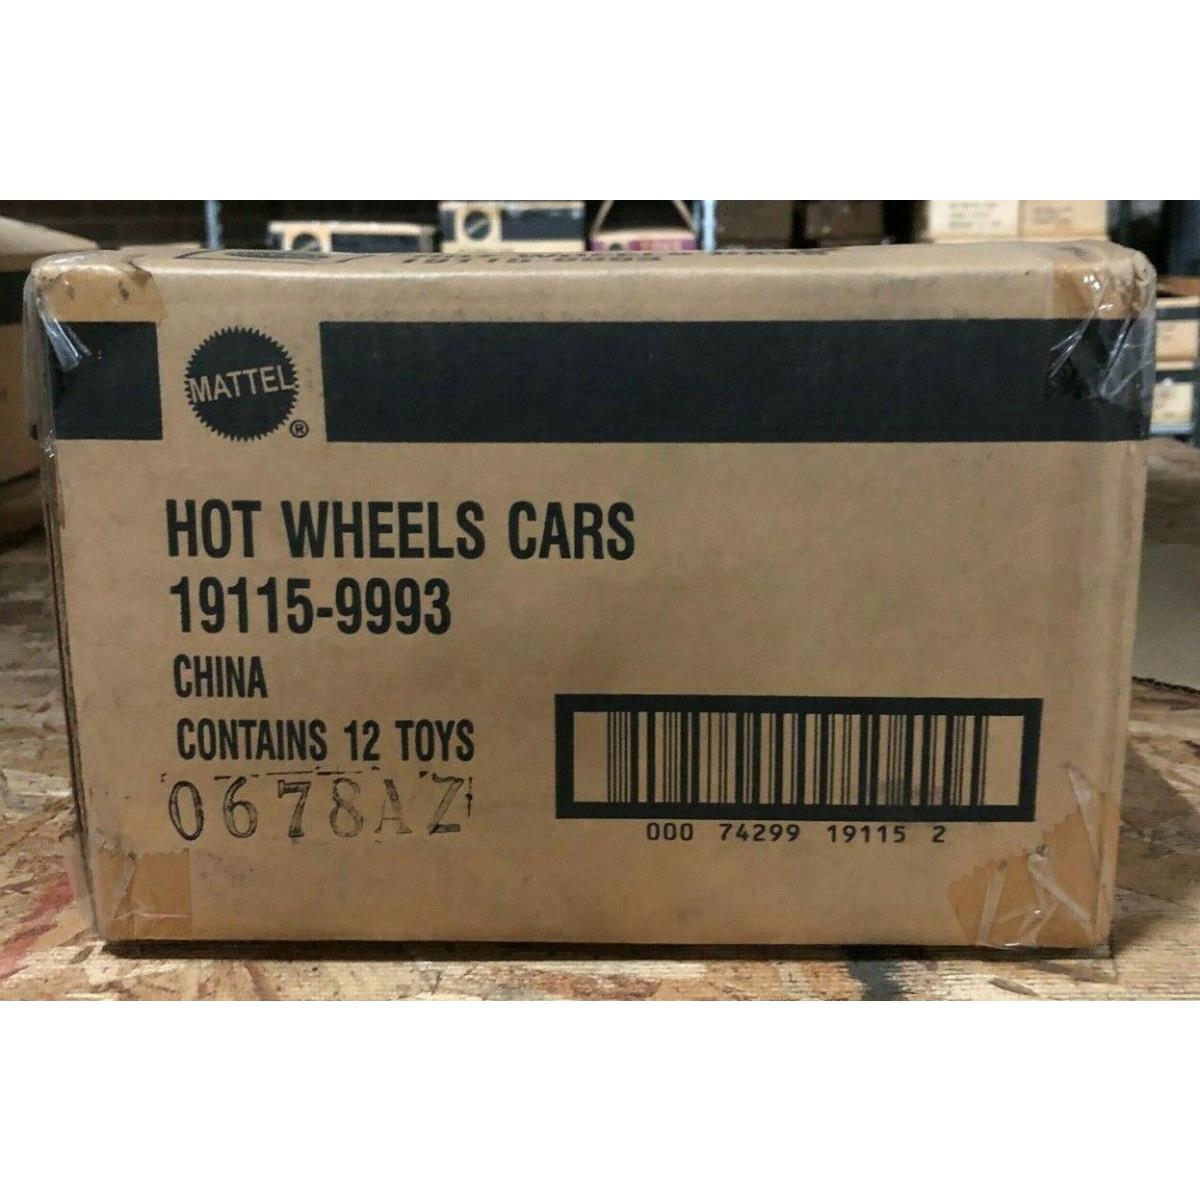 Factory Case Of 12 Hot Wheels Cars 19115-9993 Pro Racing Mattel Collector